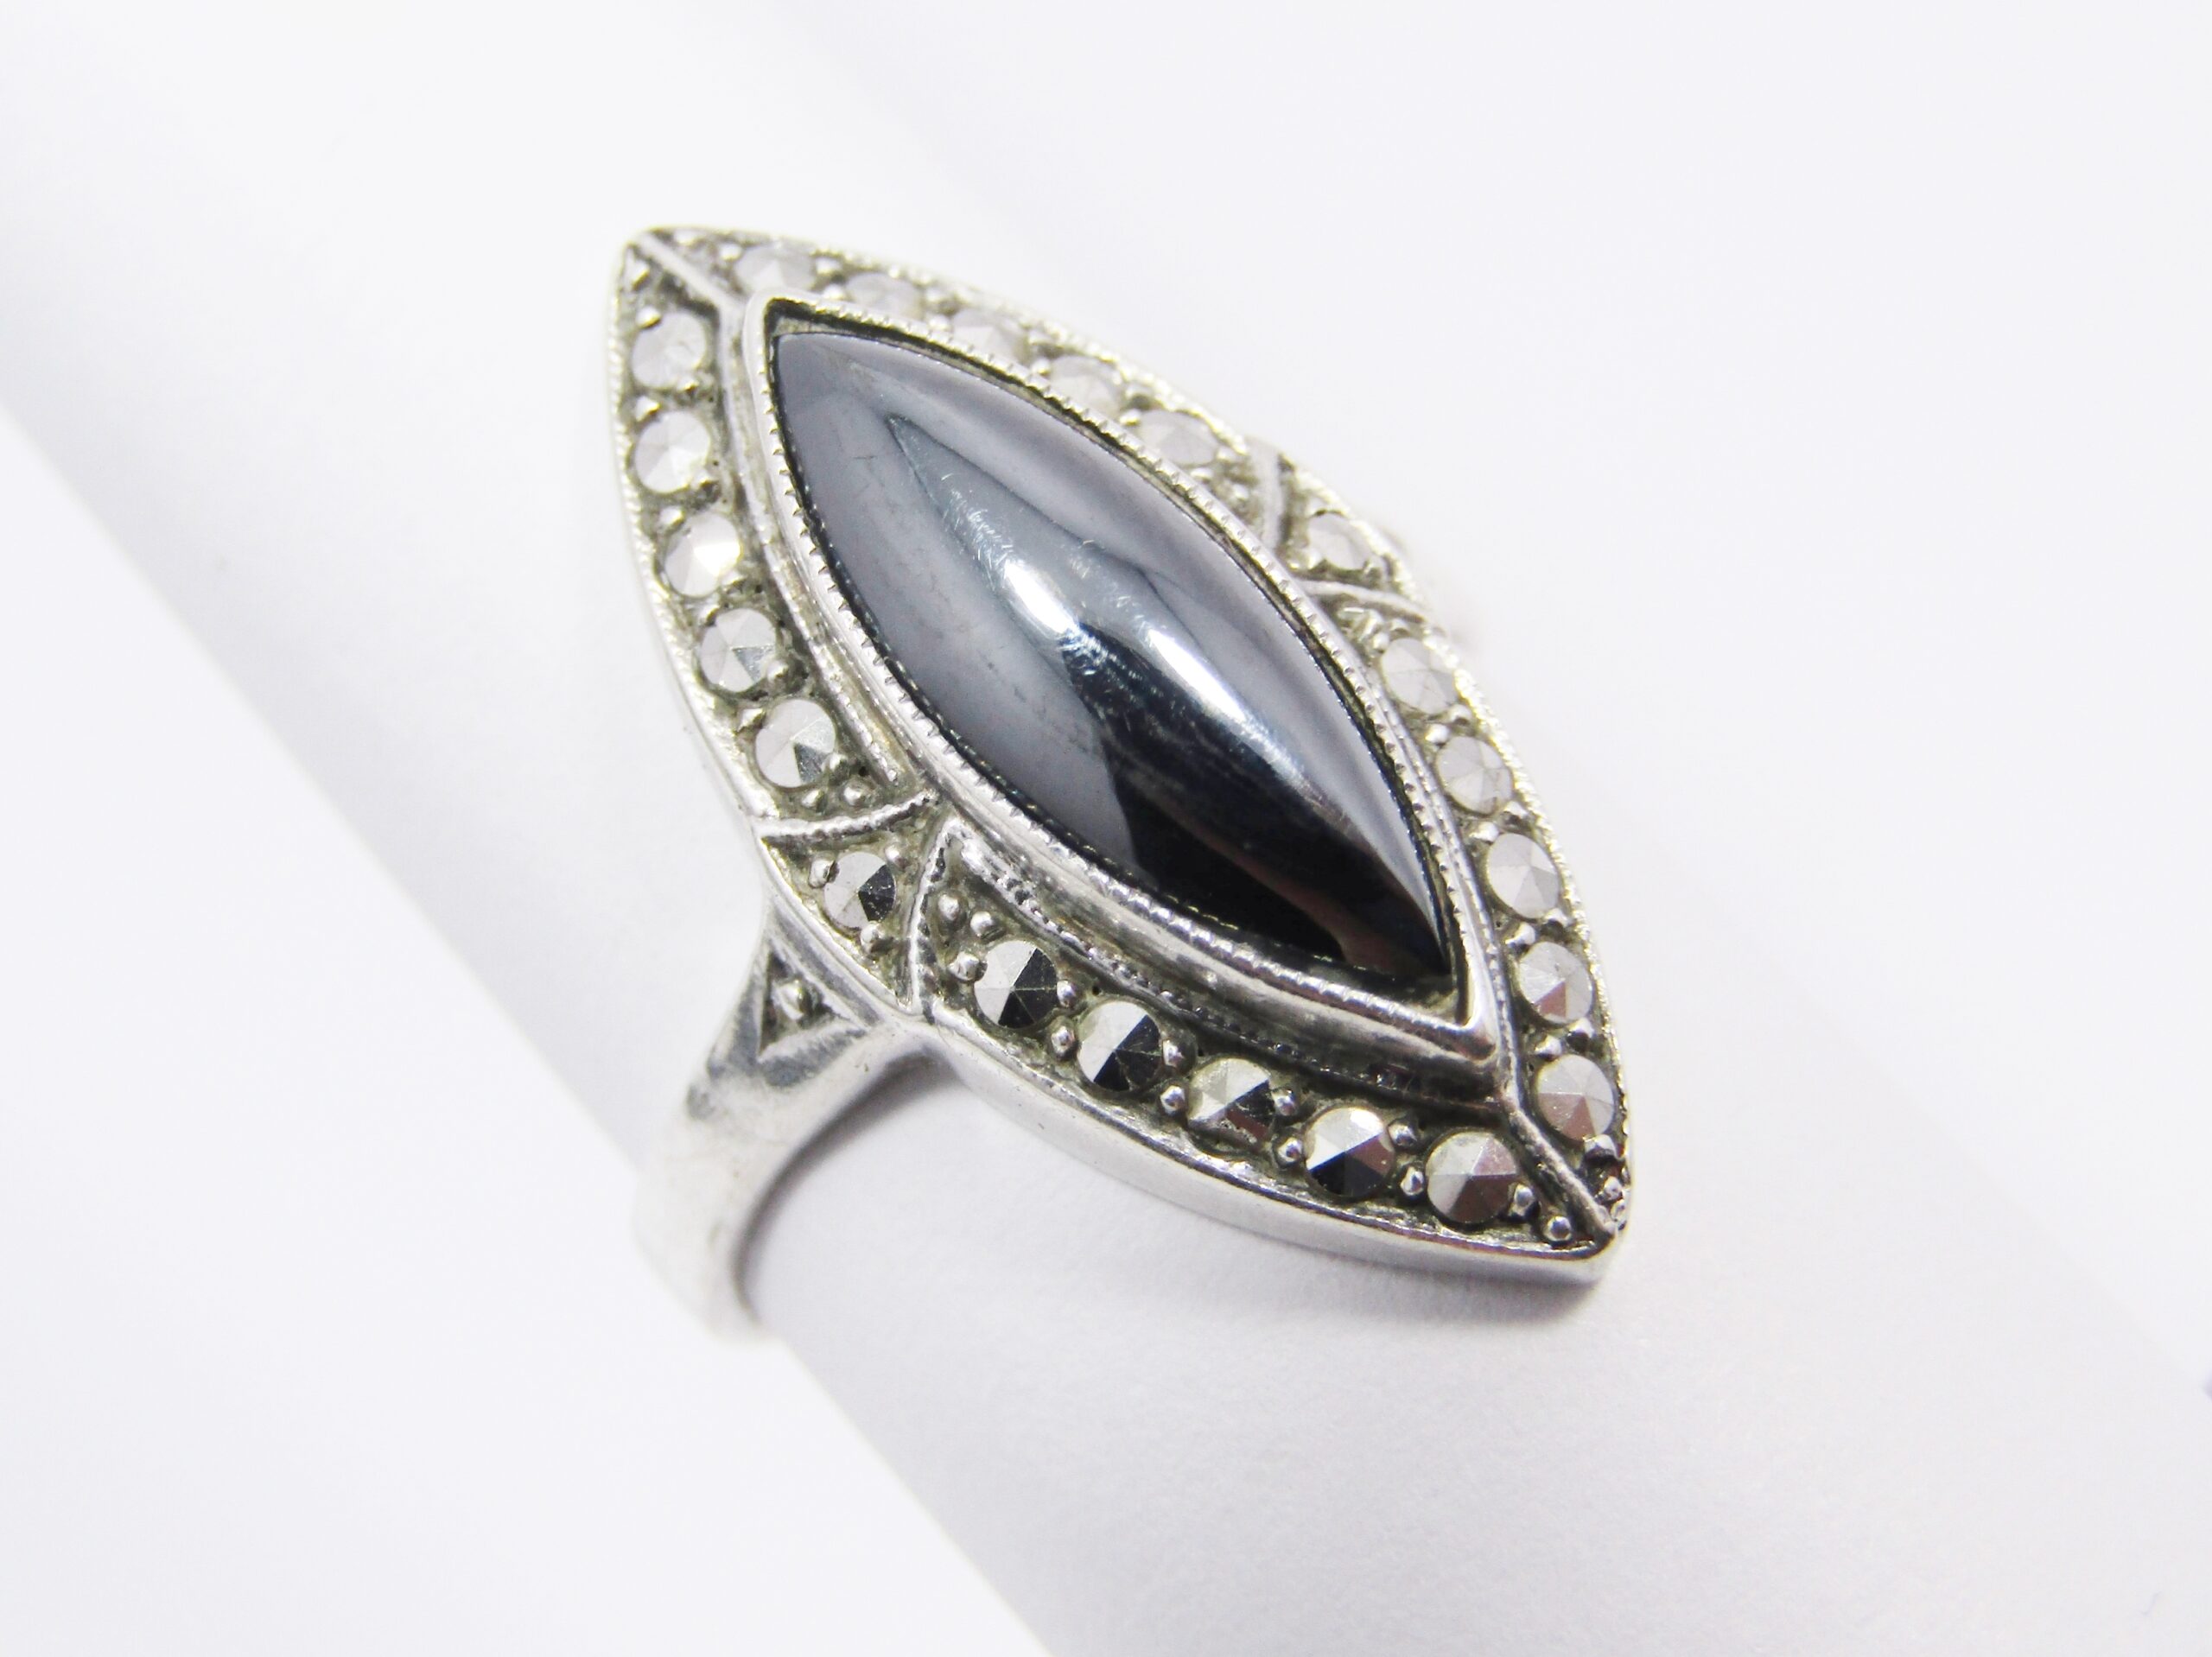 A Stunning Hematite Ring Surrounded with Marcasite’s in Sterling Silver.